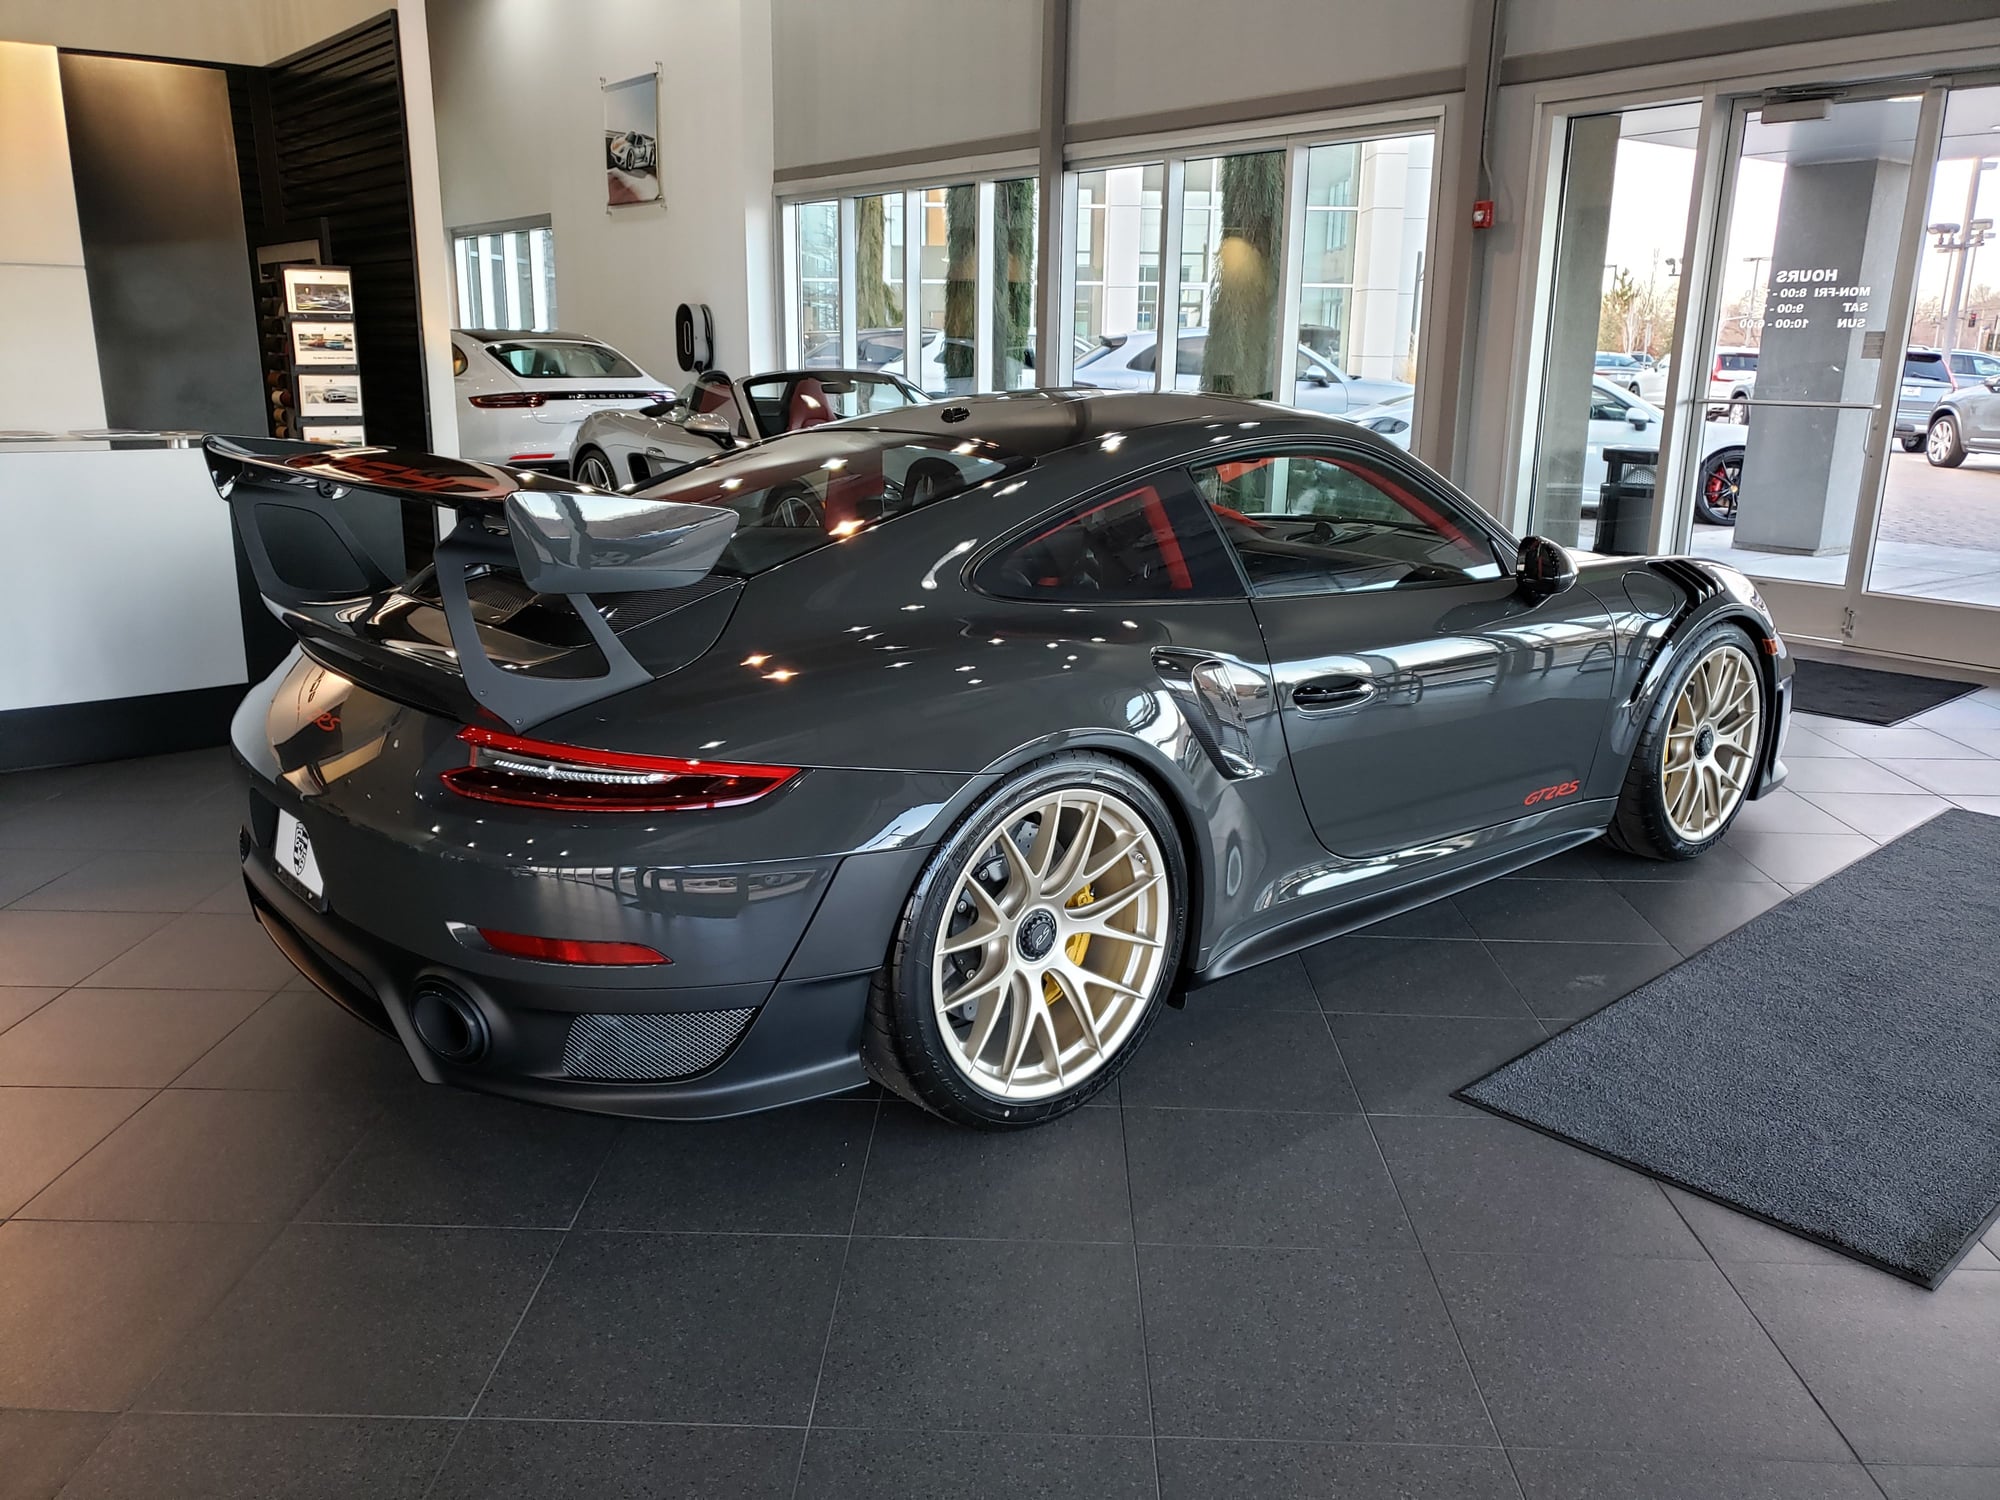 2018 Porsche 911 - 2018 Porsche GT2RS Weissach PTS - Slate Grey - Used - VIN WP0AE2A91JS186071 - 500 Miles - 6 cyl - 2WD - Automatic - Coupe - Gray - Reno, NV 89511, United States